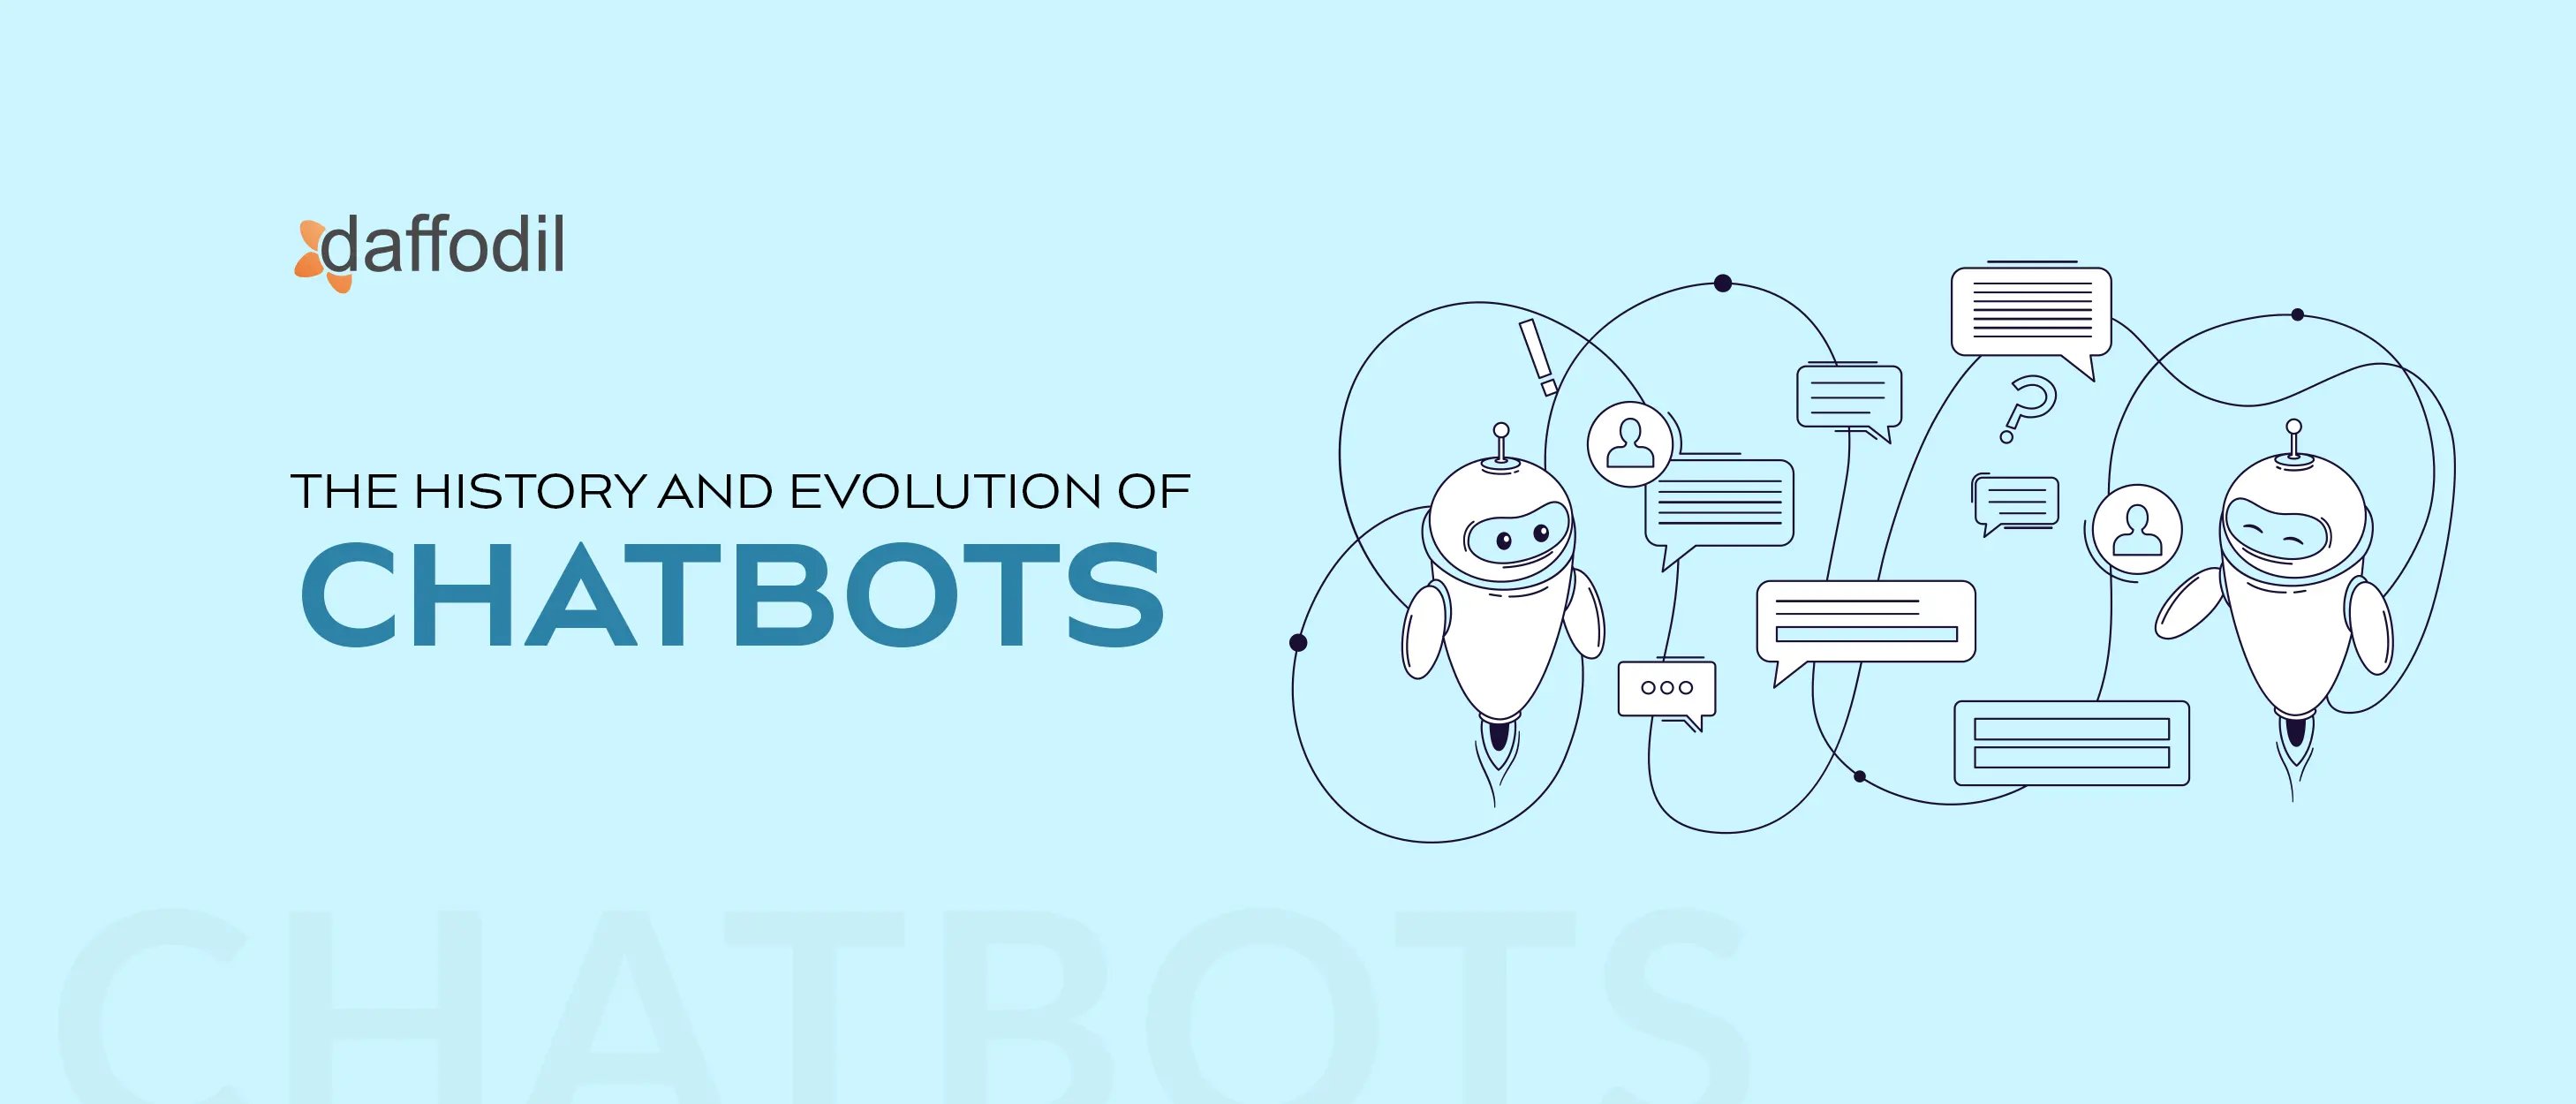 The History and Evolution of Chatbots (1)